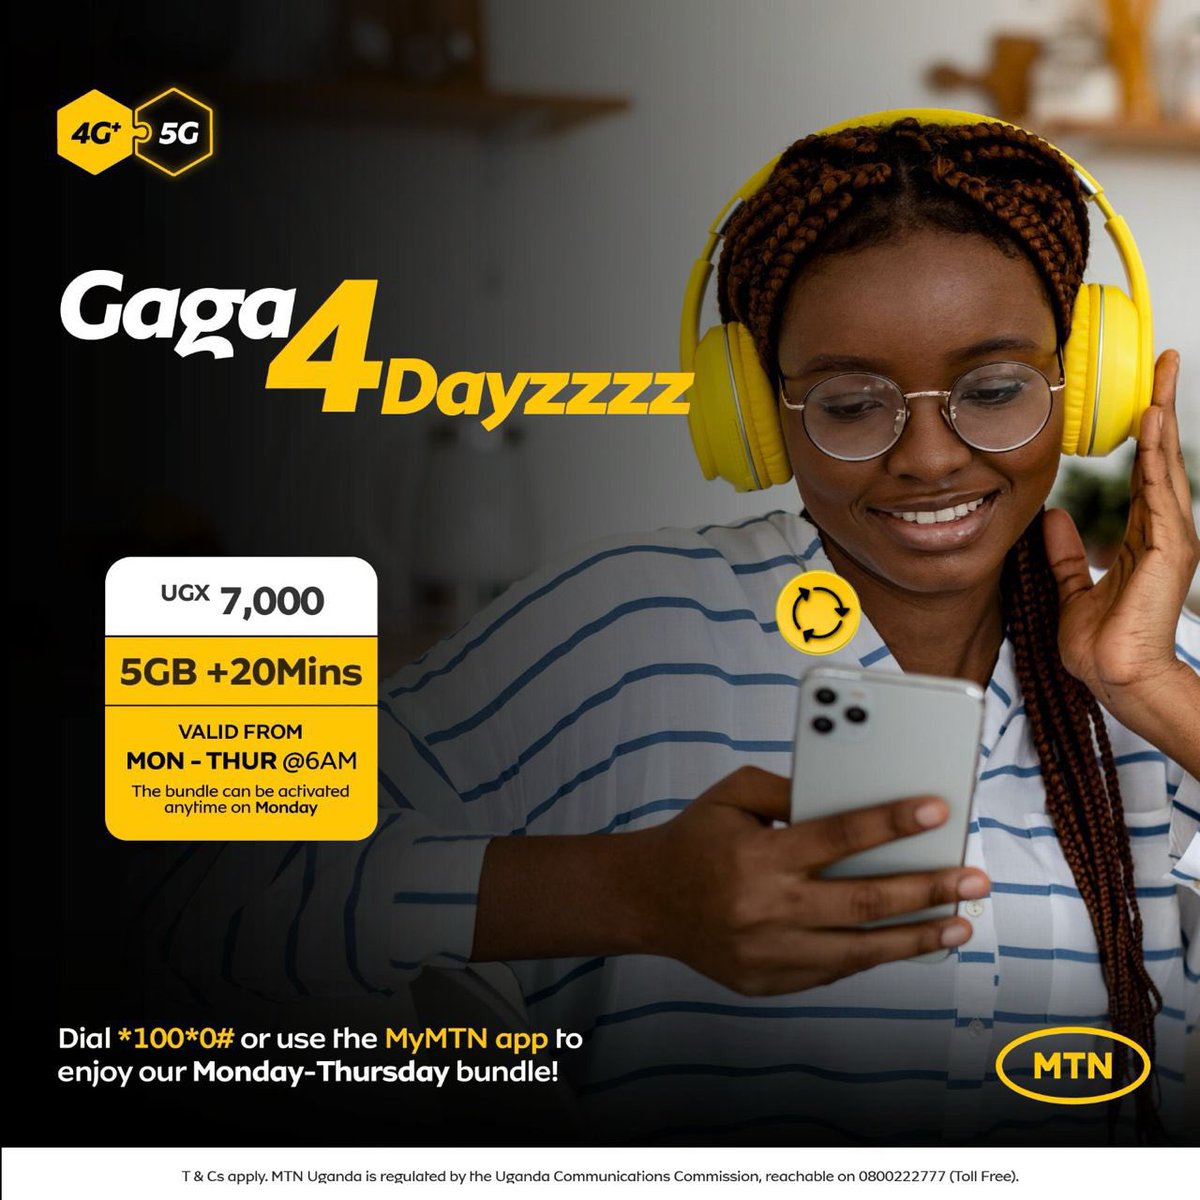 Try out these bundles which run from Mon to Thur at only 7k 🥳 
Just dial *100*0# or use #MyMTNAPP and get 5GB + 20 mins 🕺🏽💃🏽
#Gaga4dayzzzz